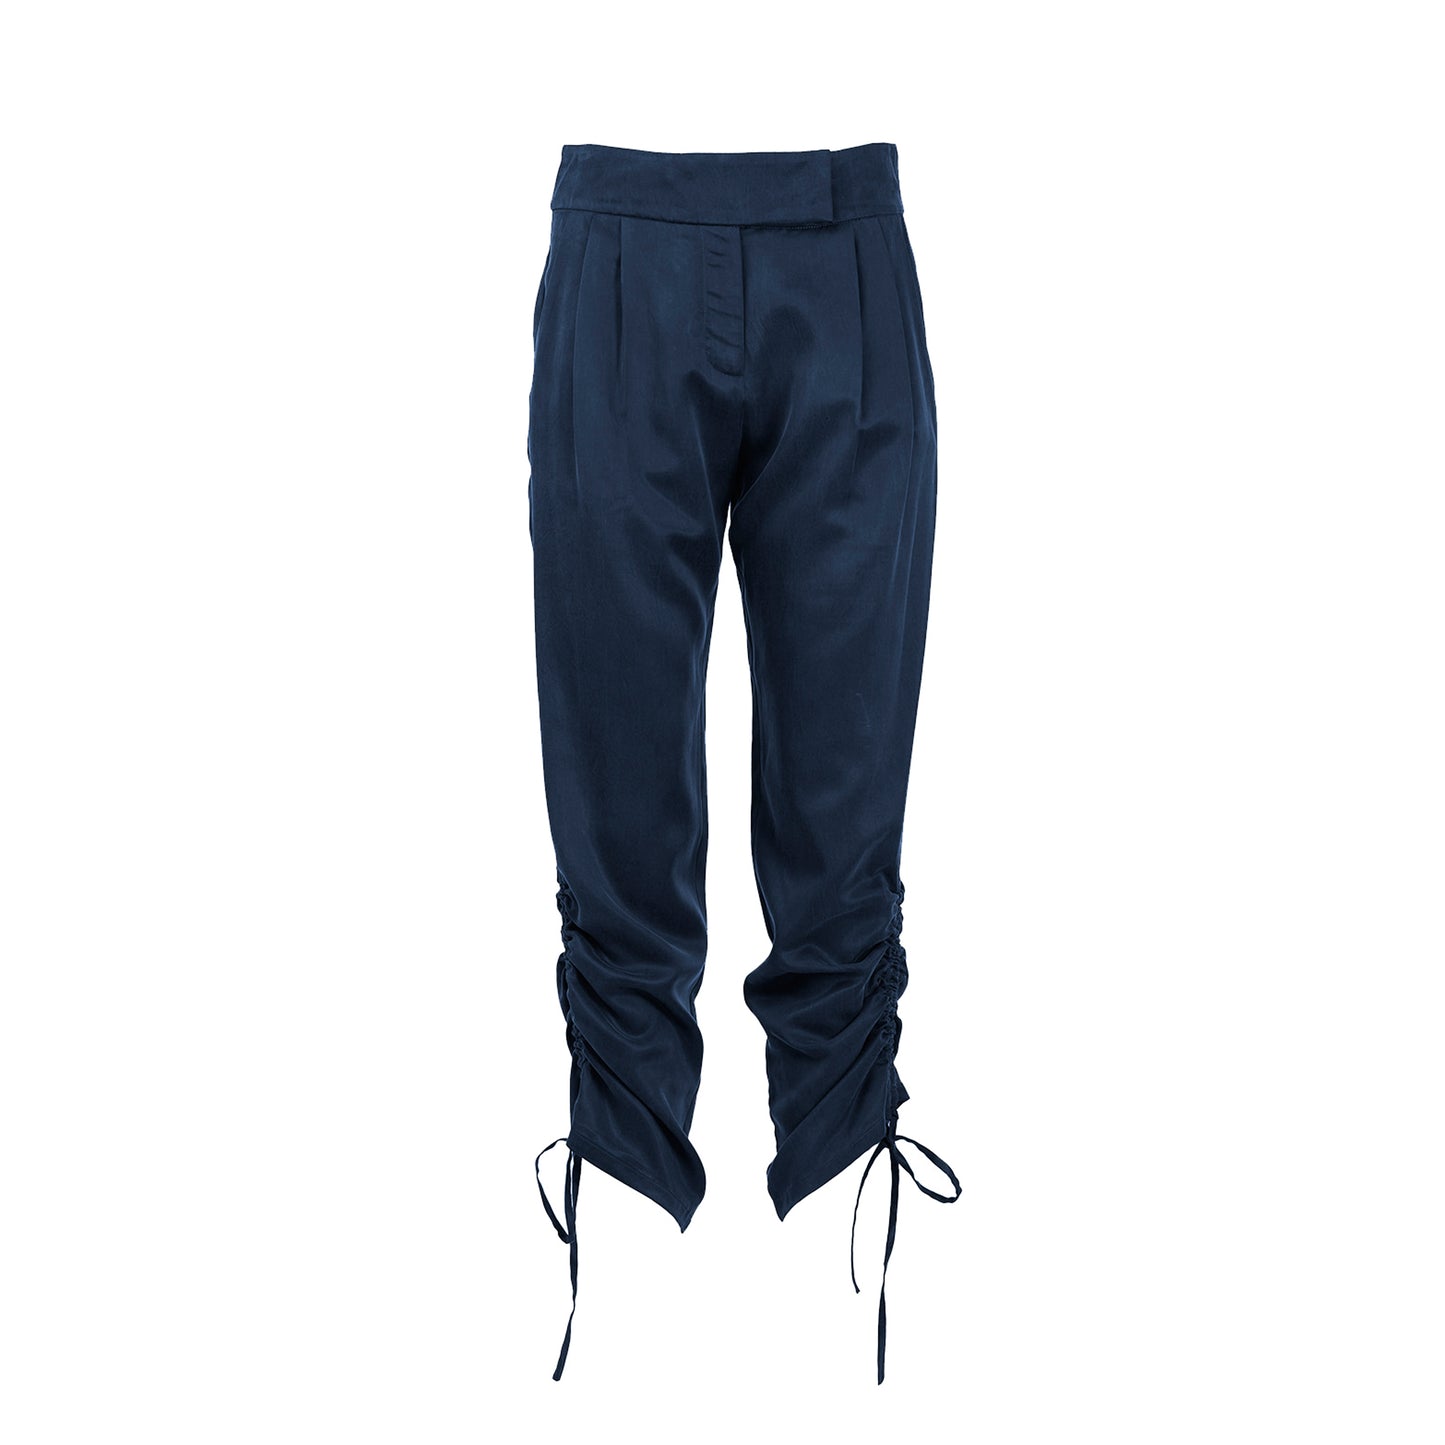 Pants with contoured waist band and side drawstring detail in Navy